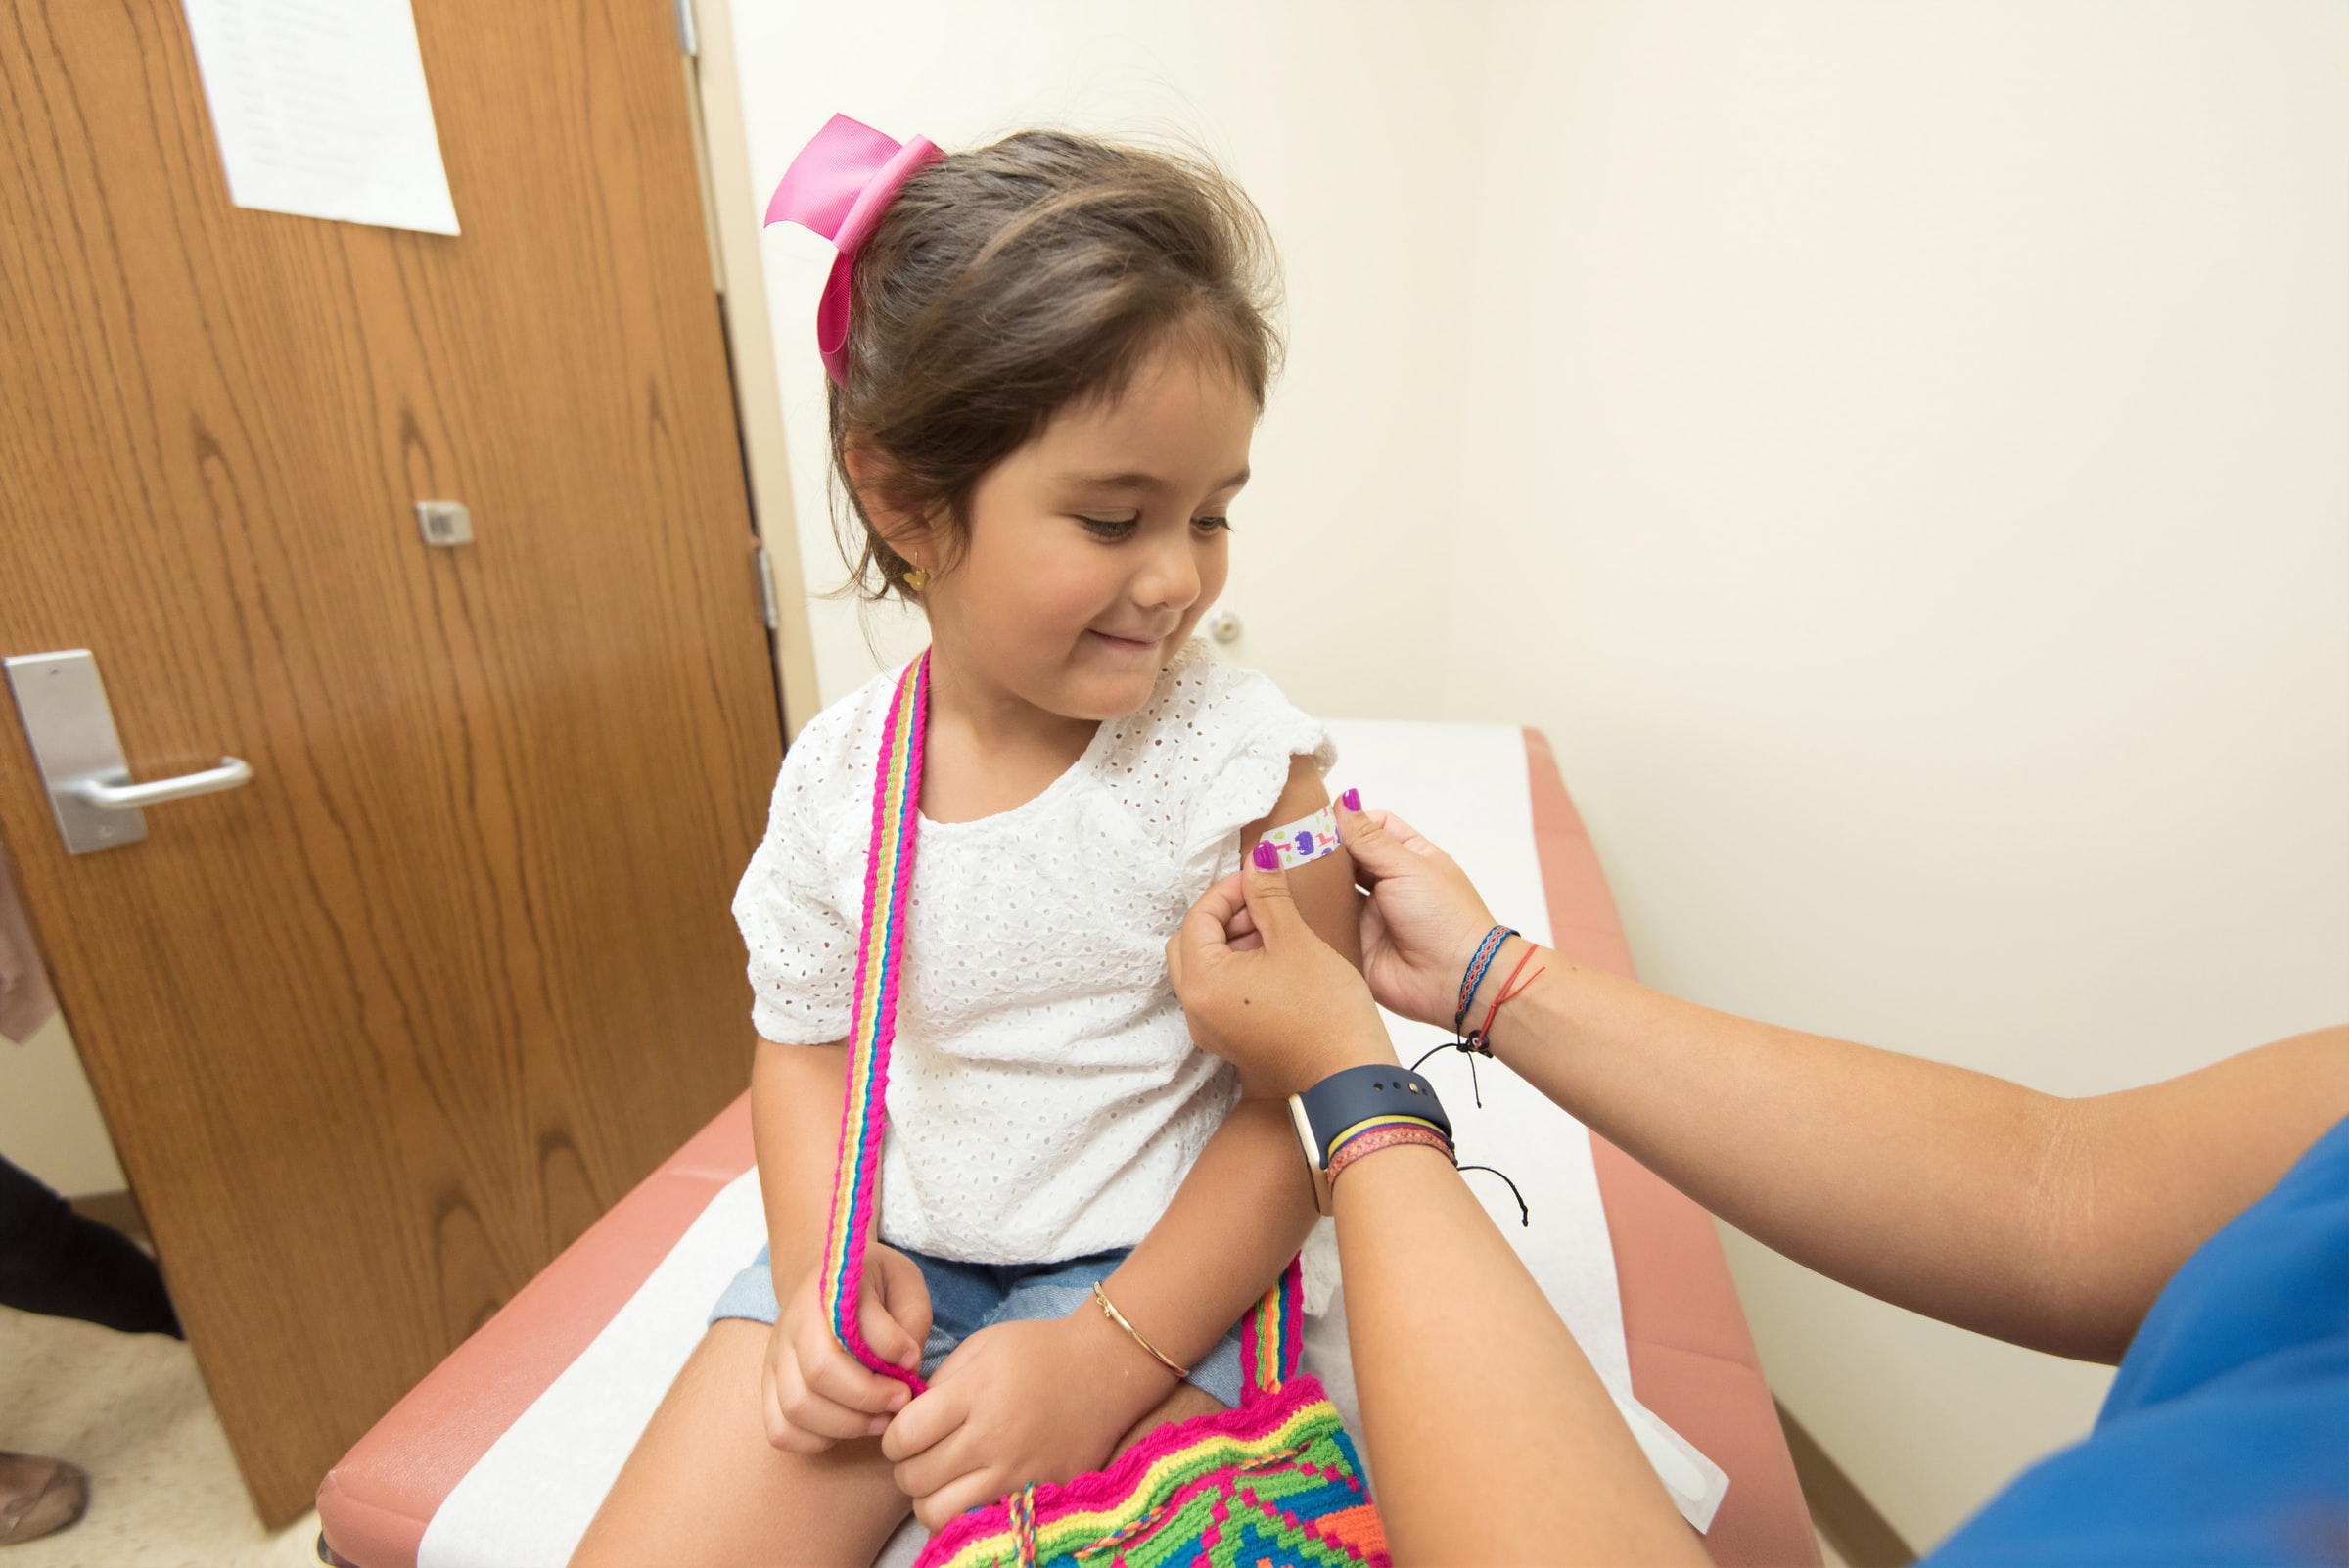 Up to 80% of Arizona’s children are not seeing their pediatrician right now, according to findings released by the Arizona chapter of the American Academy of Pediatrics, or AzAAP. As a result, AzAAP is launching its “Back to the Office” campaign to boost the number of children checking in with their local pediatrician, even if […]